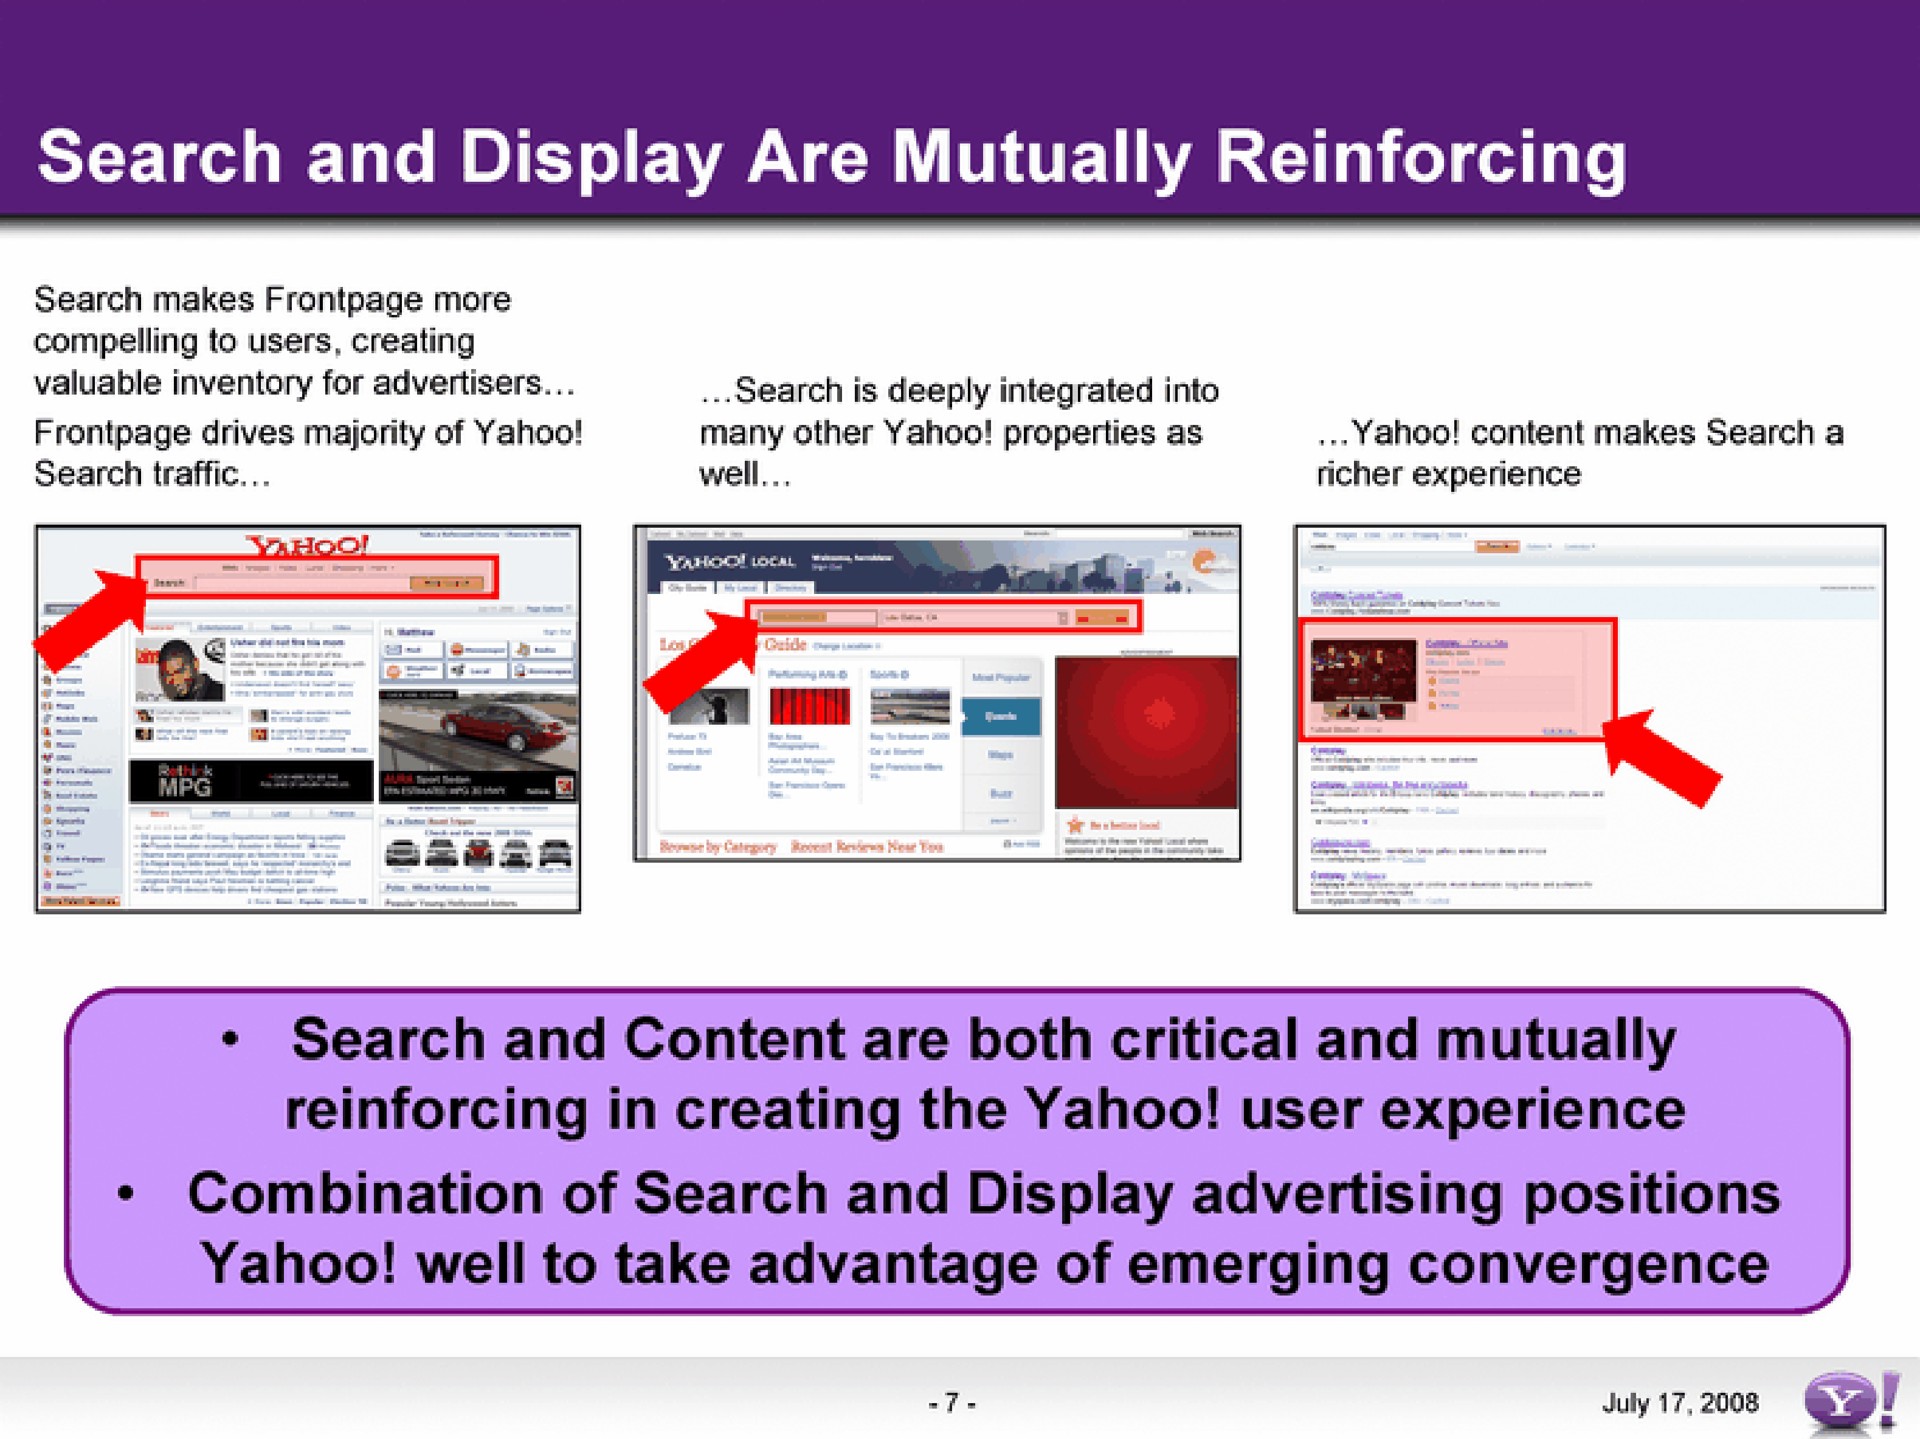 search and display are mutually reinforcing reinforcing in creating the yahoo user experience yahoo well to take advantage of emerging convergence combination of search and display advertising positions | Yahoo